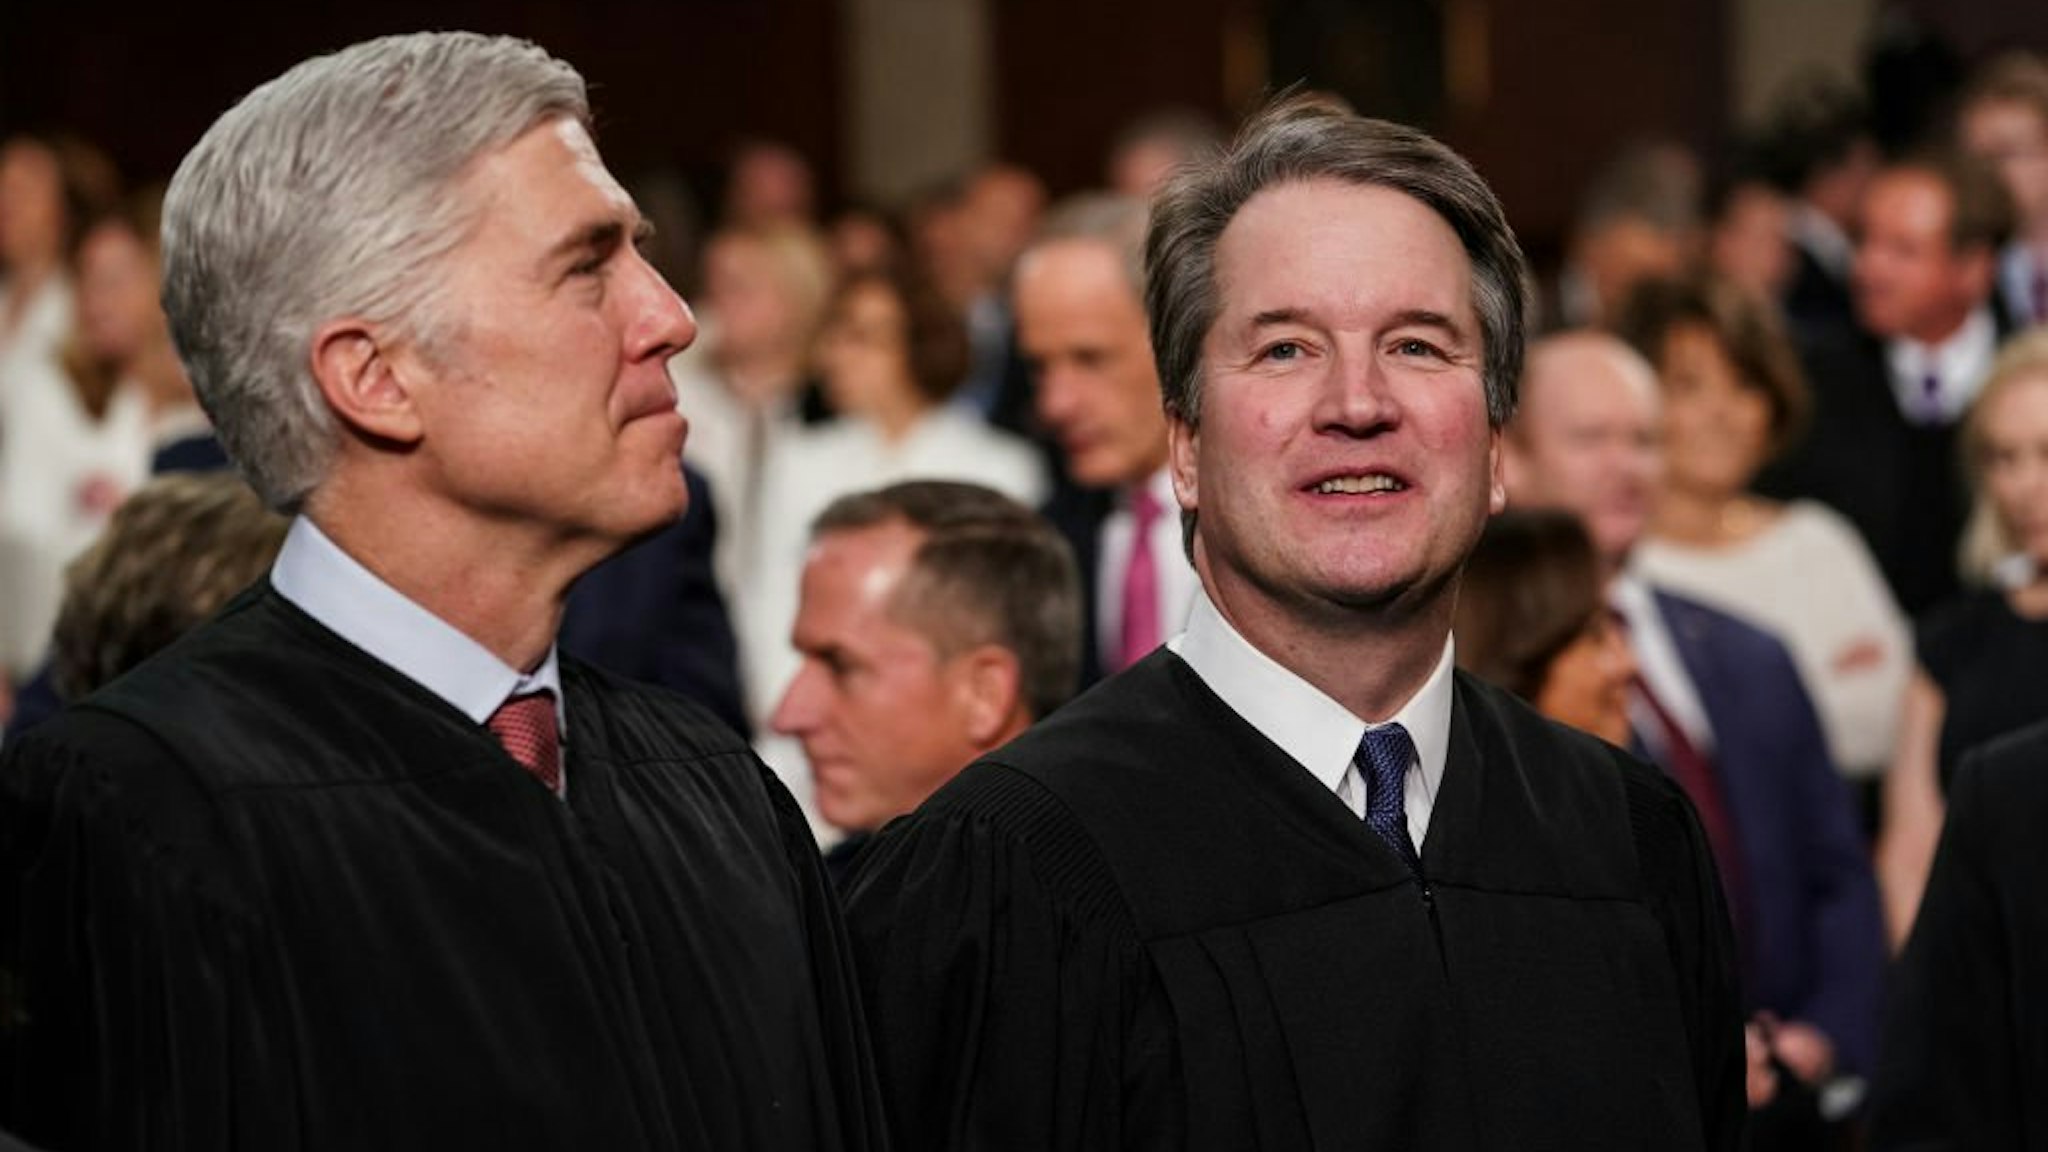 Supreme Court Justices Neil Gorsuch and Brett Kavanaugh attend the State of the Union address in the chamber of the U.S. House of Representatives at the U.S. Capitol Building on February 5, 2019 in Washington, DC.